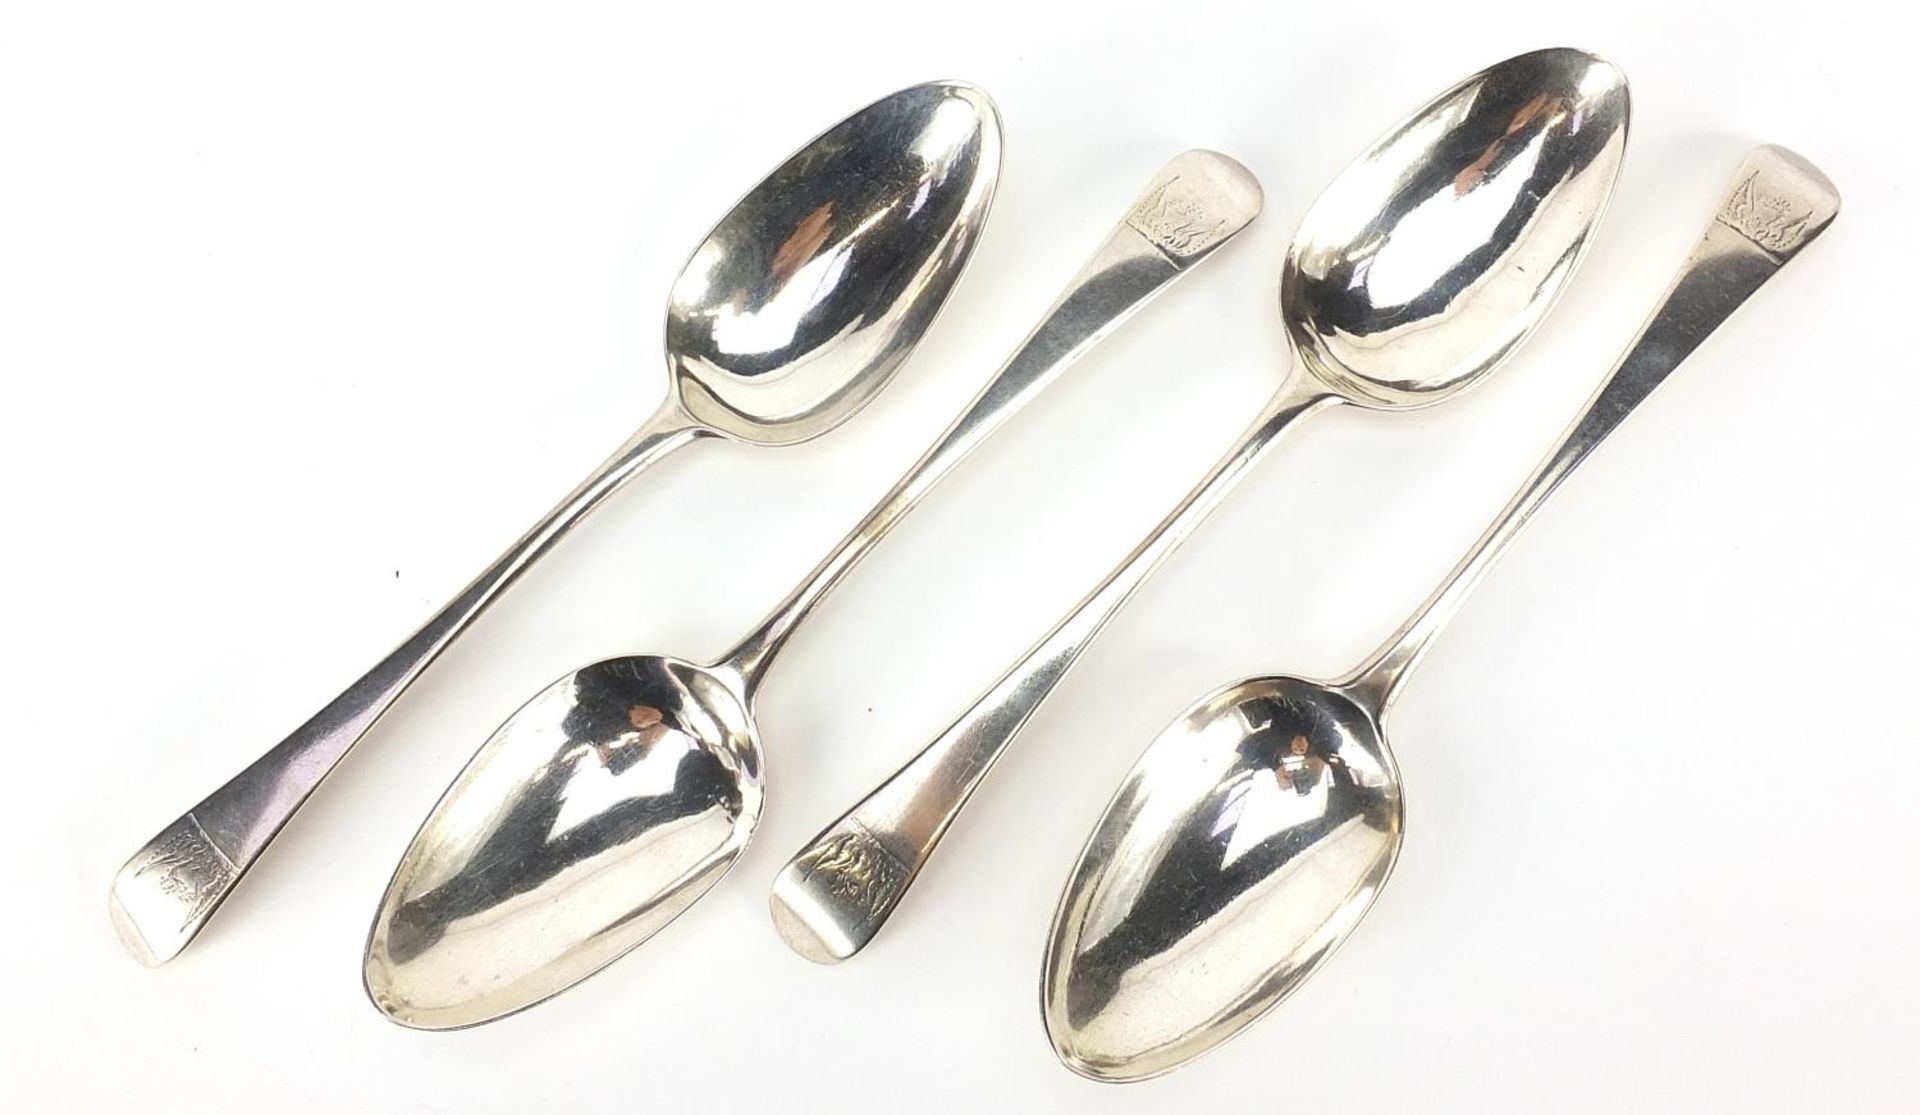 George Smith & William Fearn, set of four George III silver tablespoons, 22.5cm in length, 250.0g - Image 2 of 4